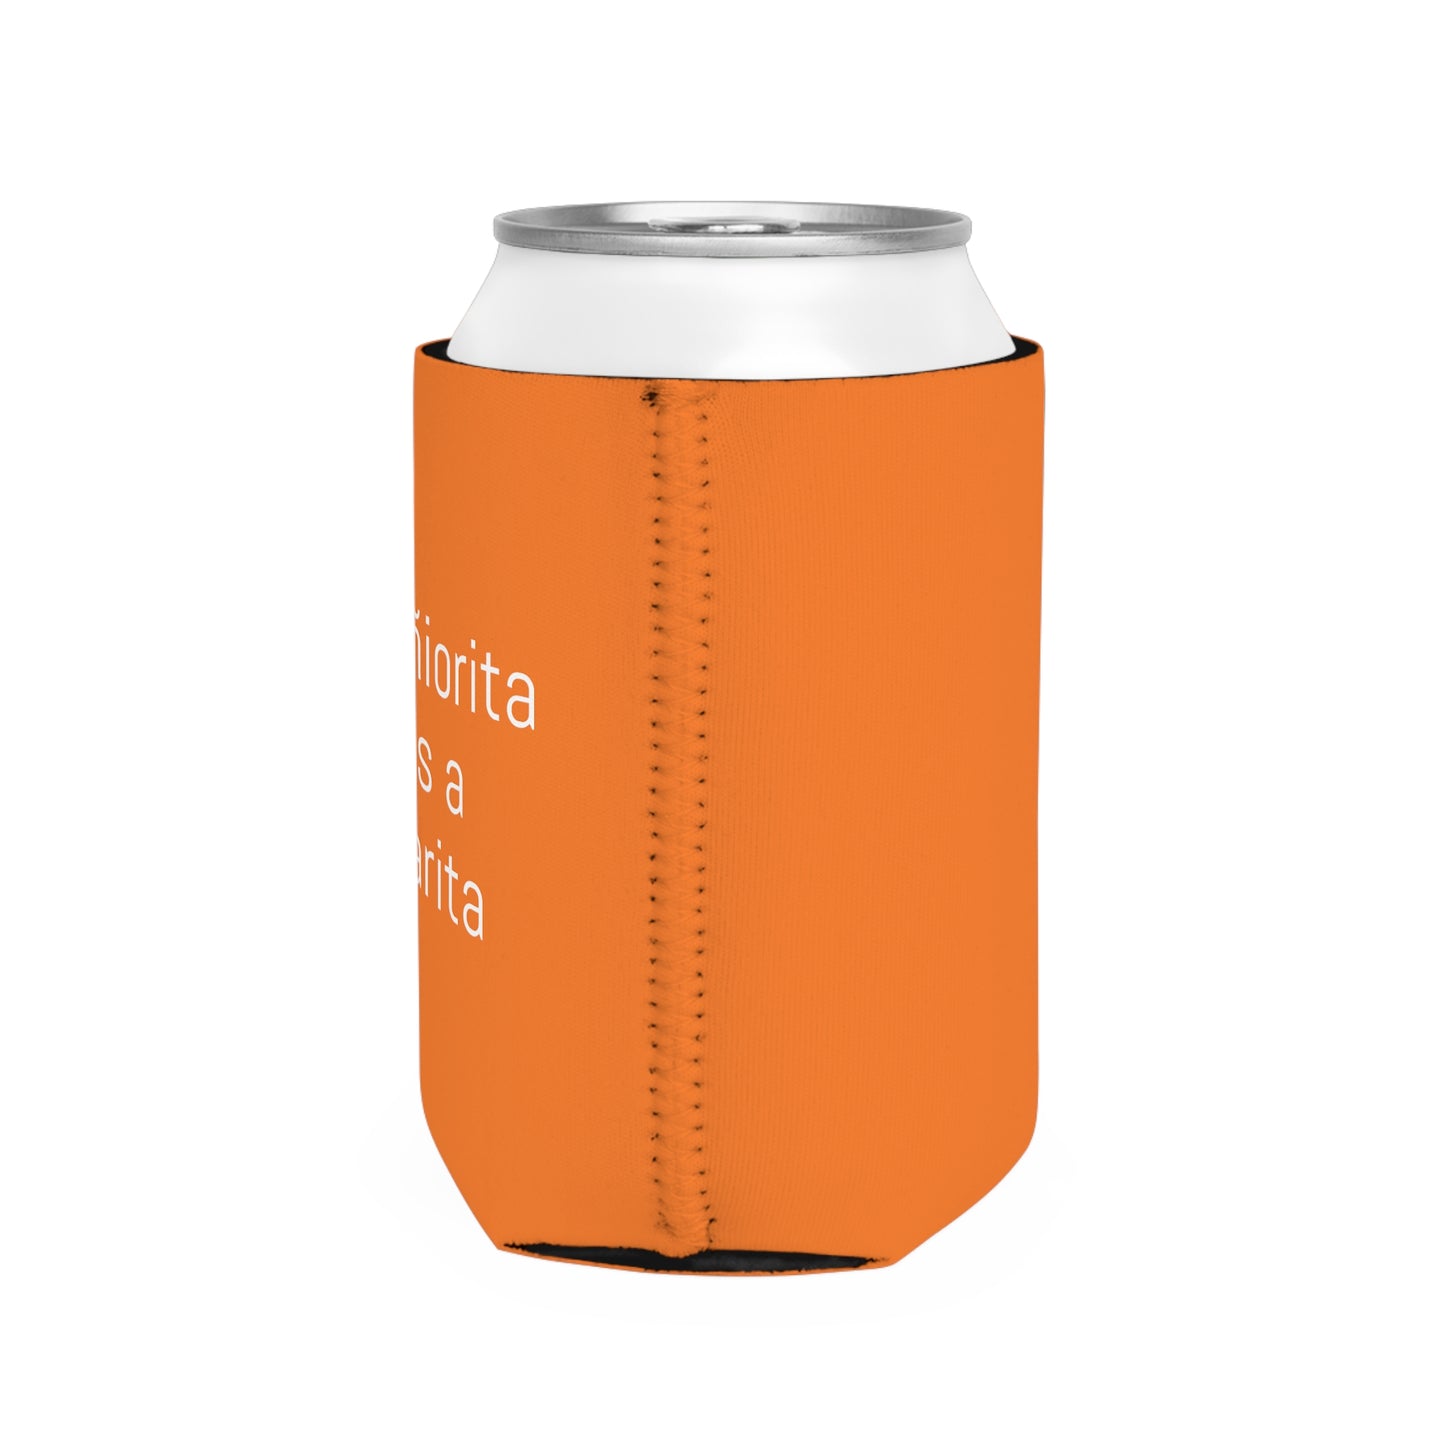 Sip Happens Collection- Need A Margarita Can Cooler Sleeve